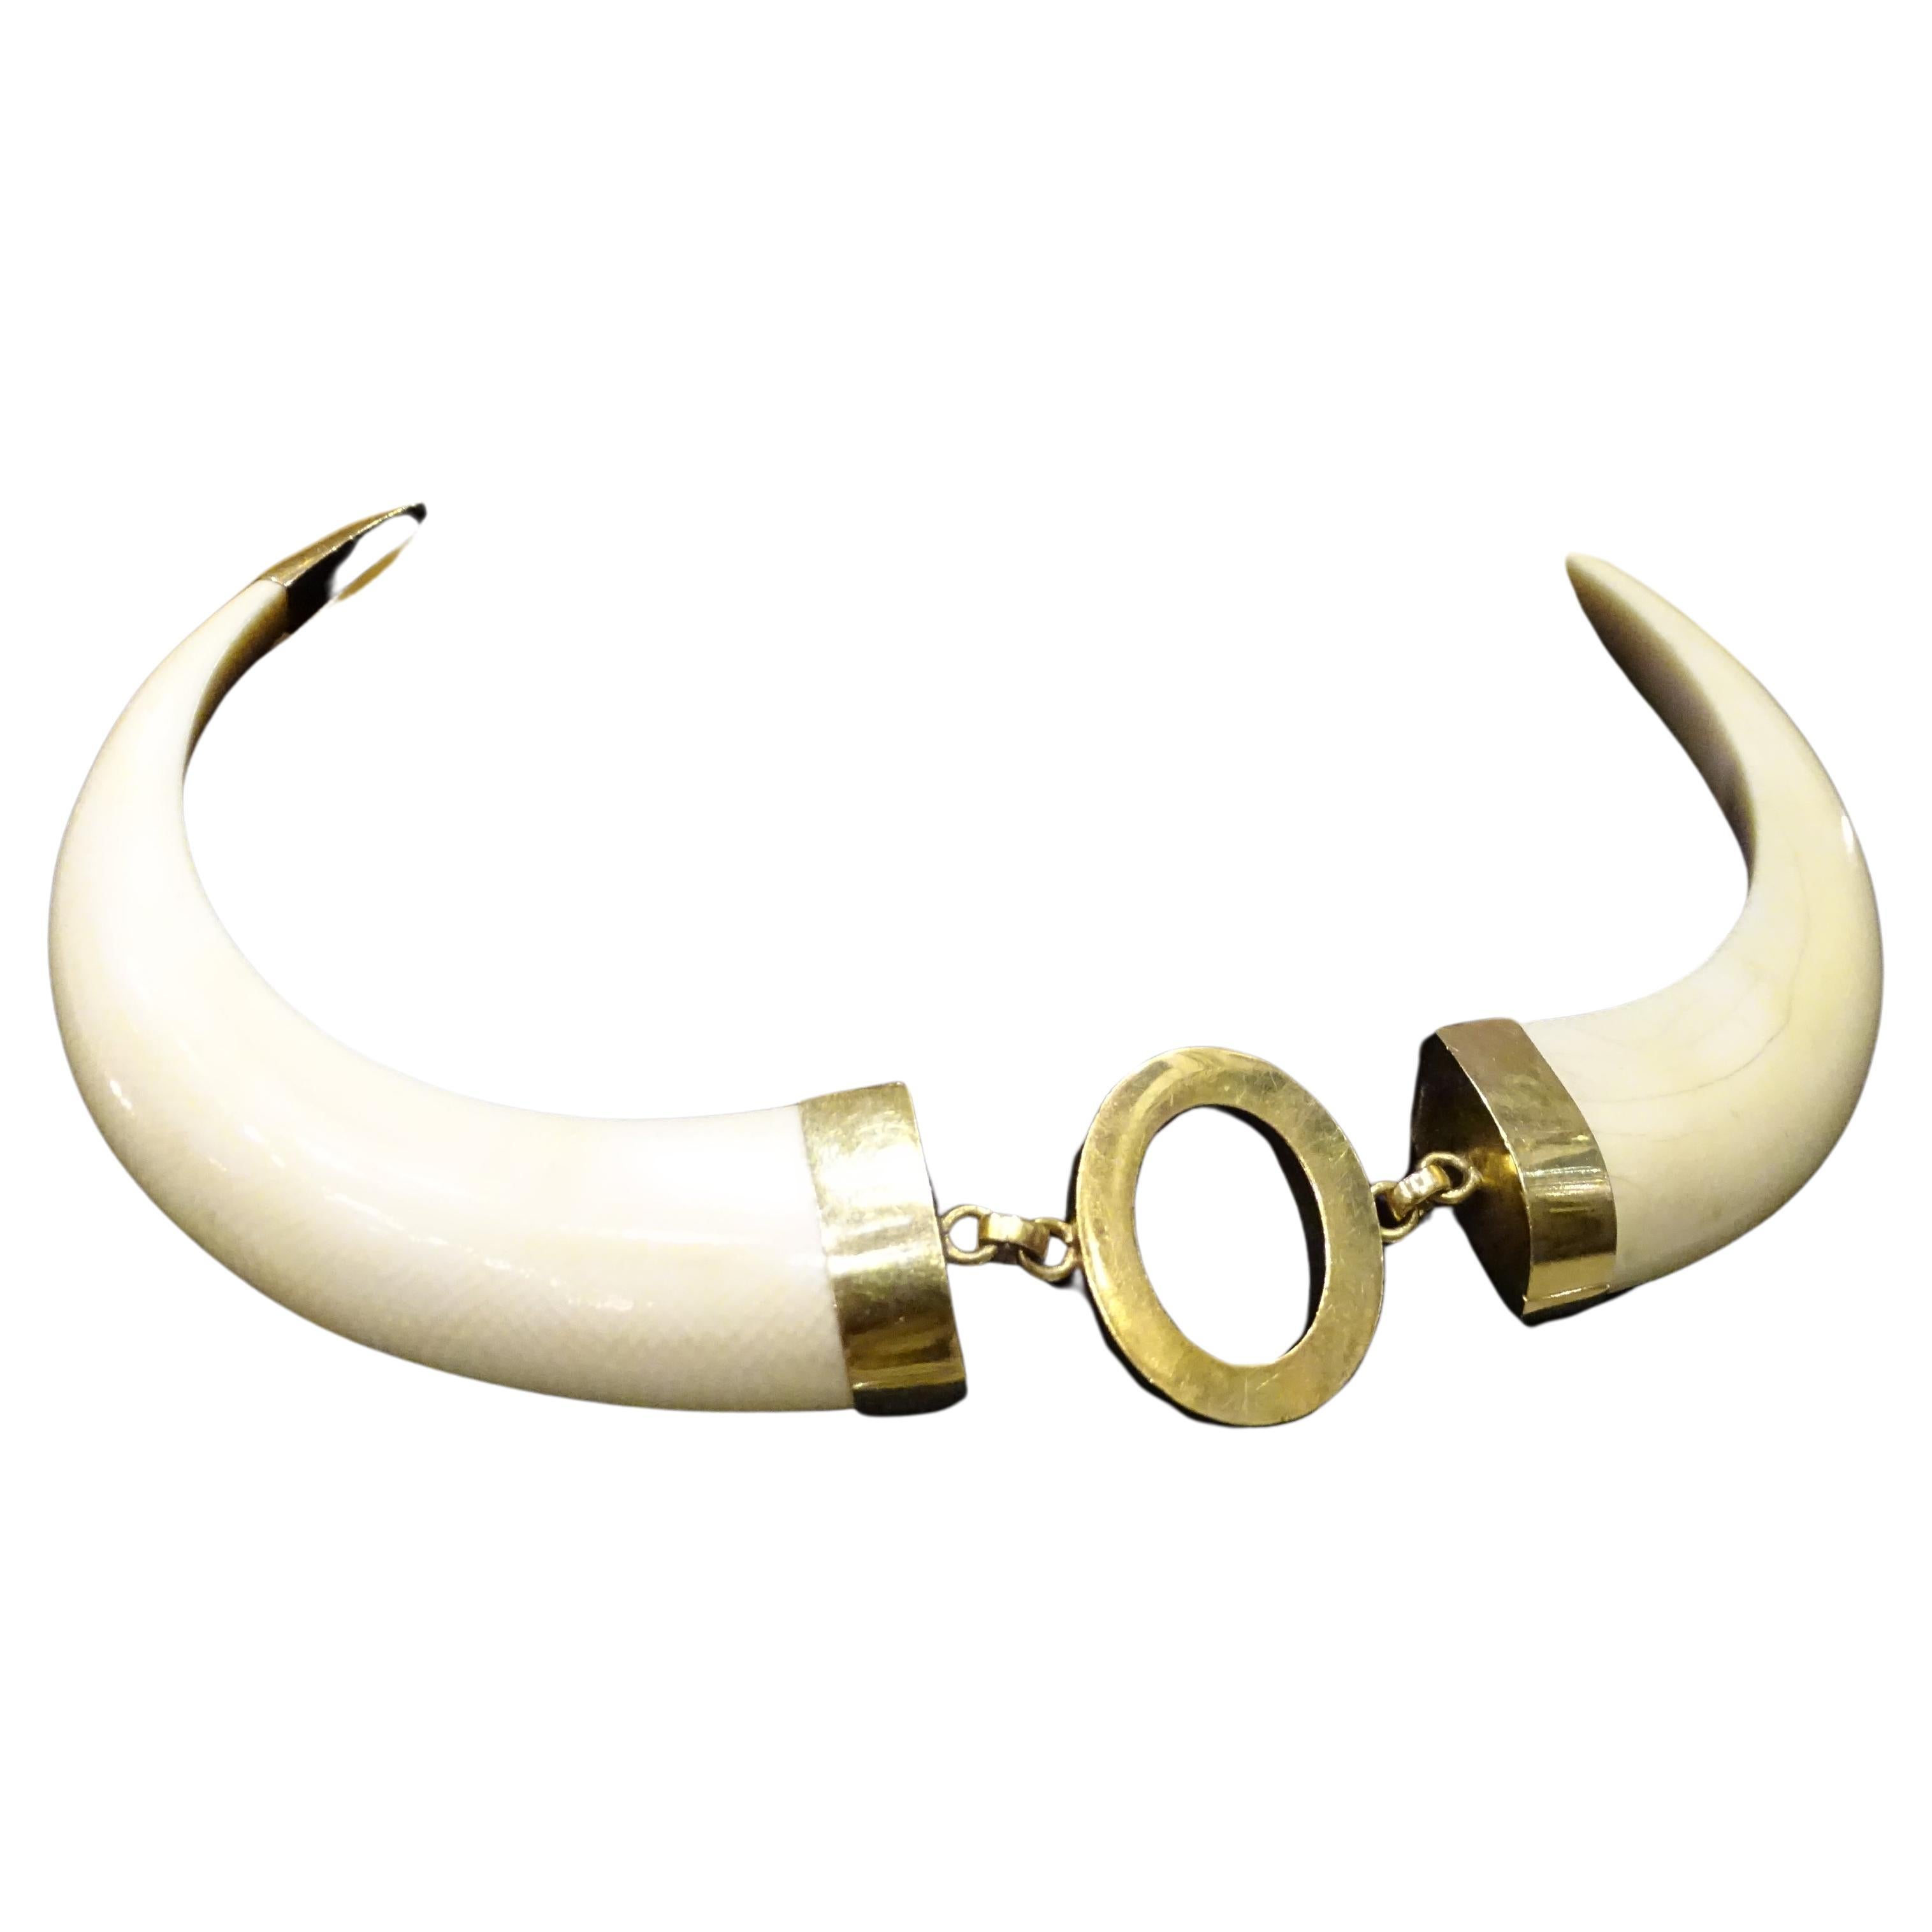 Wonderful necklace made with two polished pieces of bone in the shape of a tusk. The setting, clasp and central oval motif are made of 18-karat gold. Adjustable length thanks to chain links. Hook closure. Elegant and sophisticated.
The central